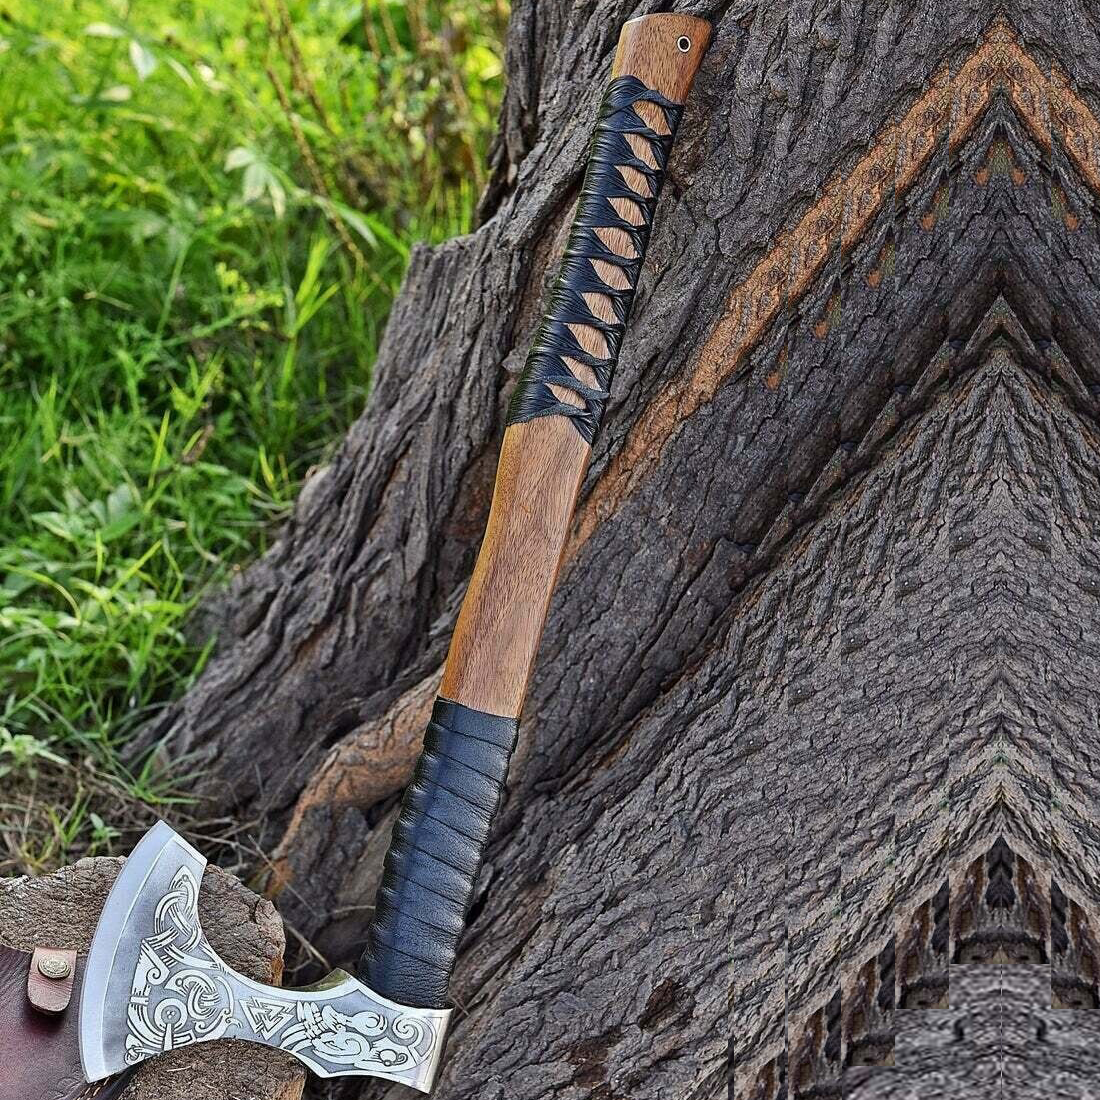 Hand Forged Carbon Steel Axe | Handmade Viking Axe | Camping Hunting and Outdoor axe | Xmas Gift